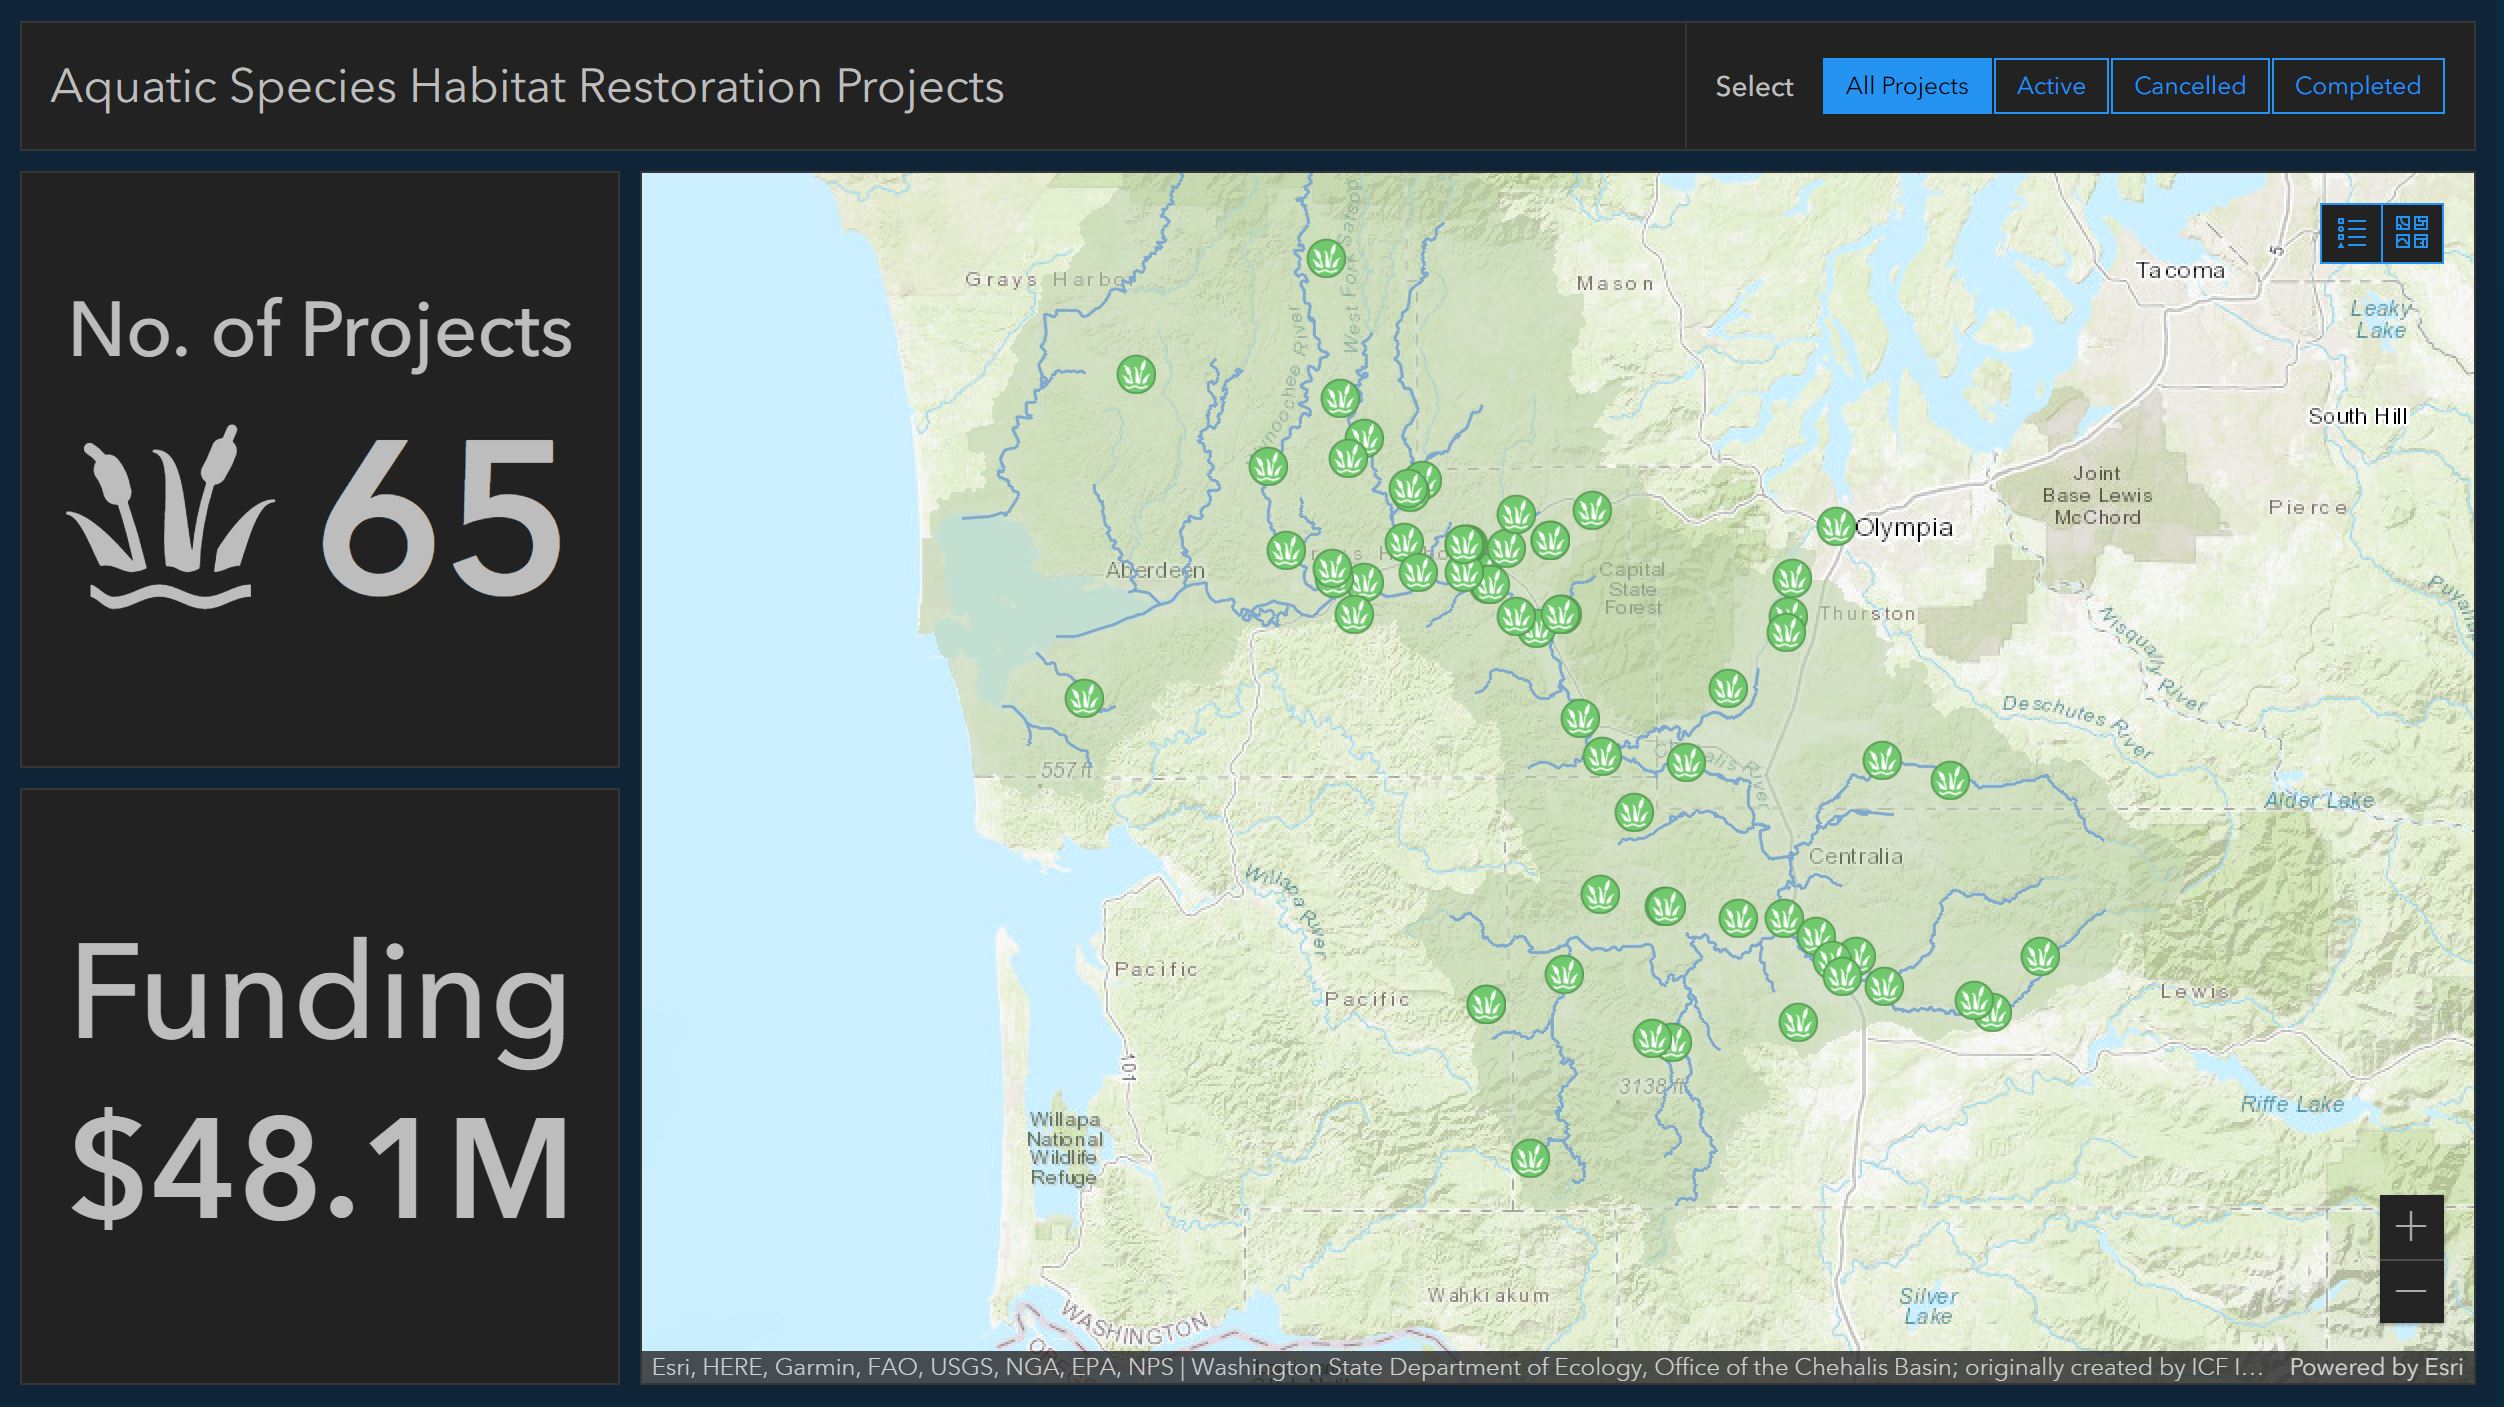 Screenshot of storymap table showing 65 projects, $48.1 million in funding, and the locations of projects in the Chehalis Basin.